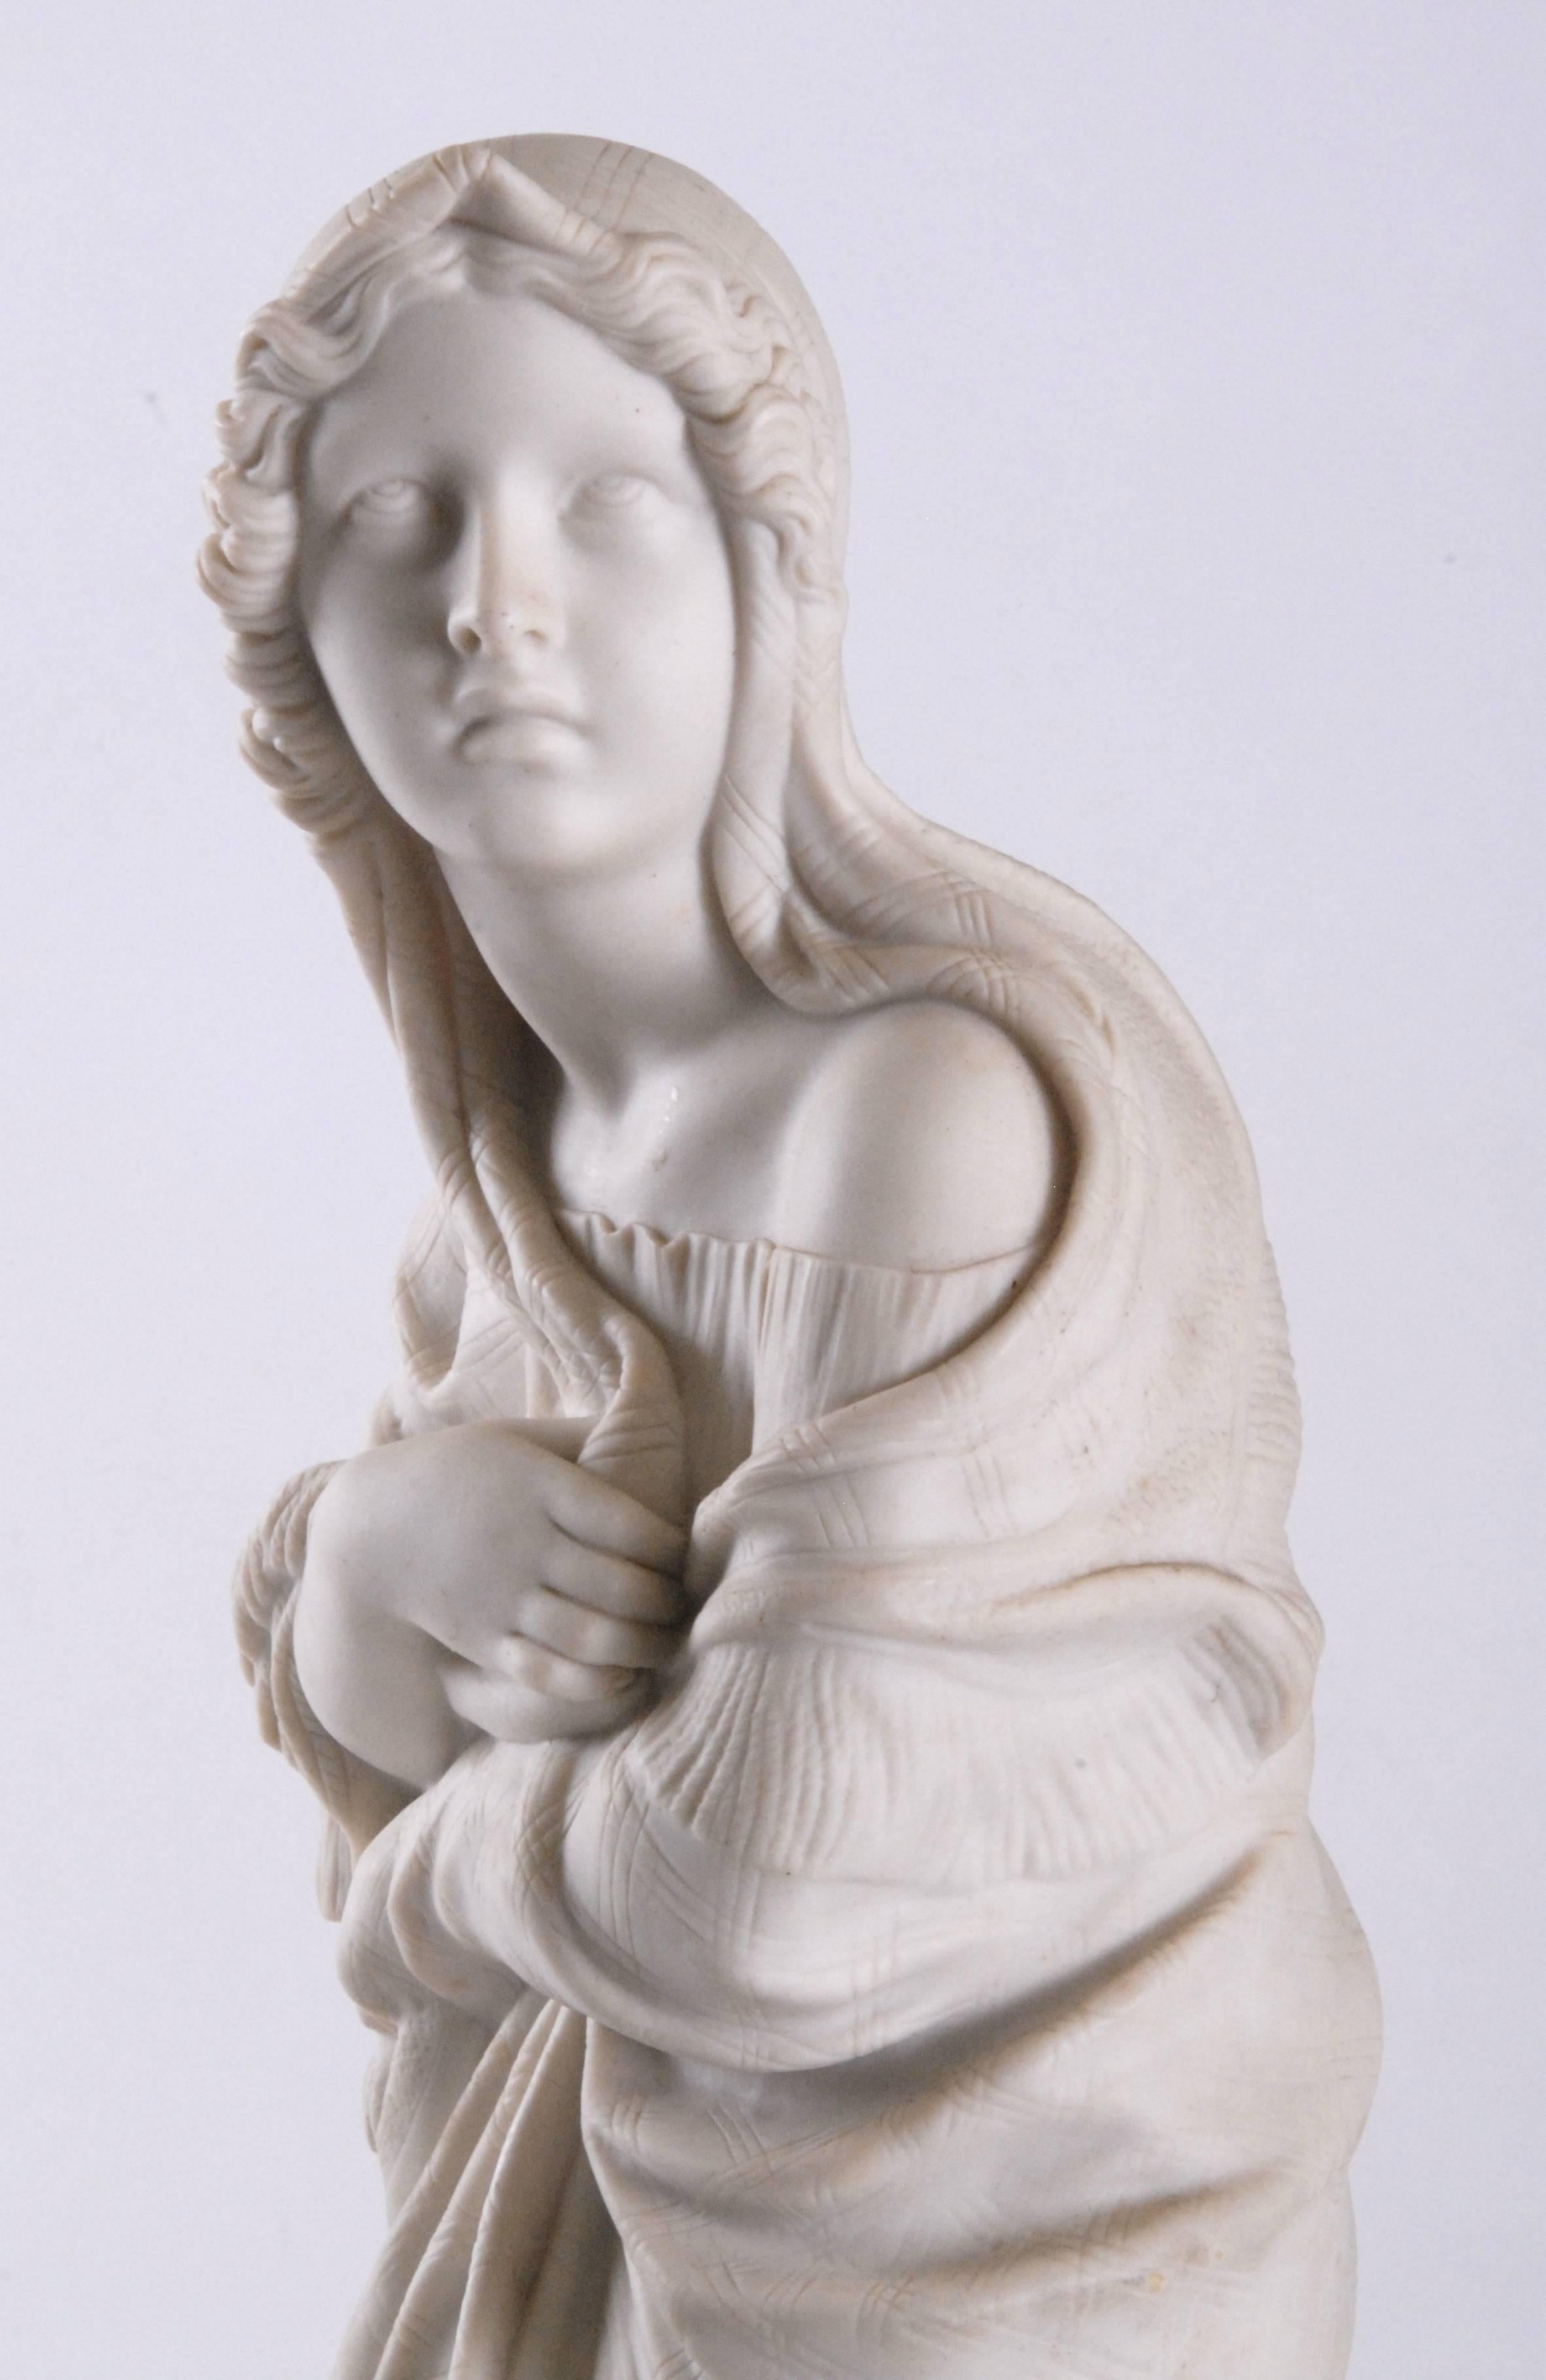 Hand-Crafted 19th Century Copeland Parian Statue, 'Storm' by William Brodie, circa 1858 For Sale